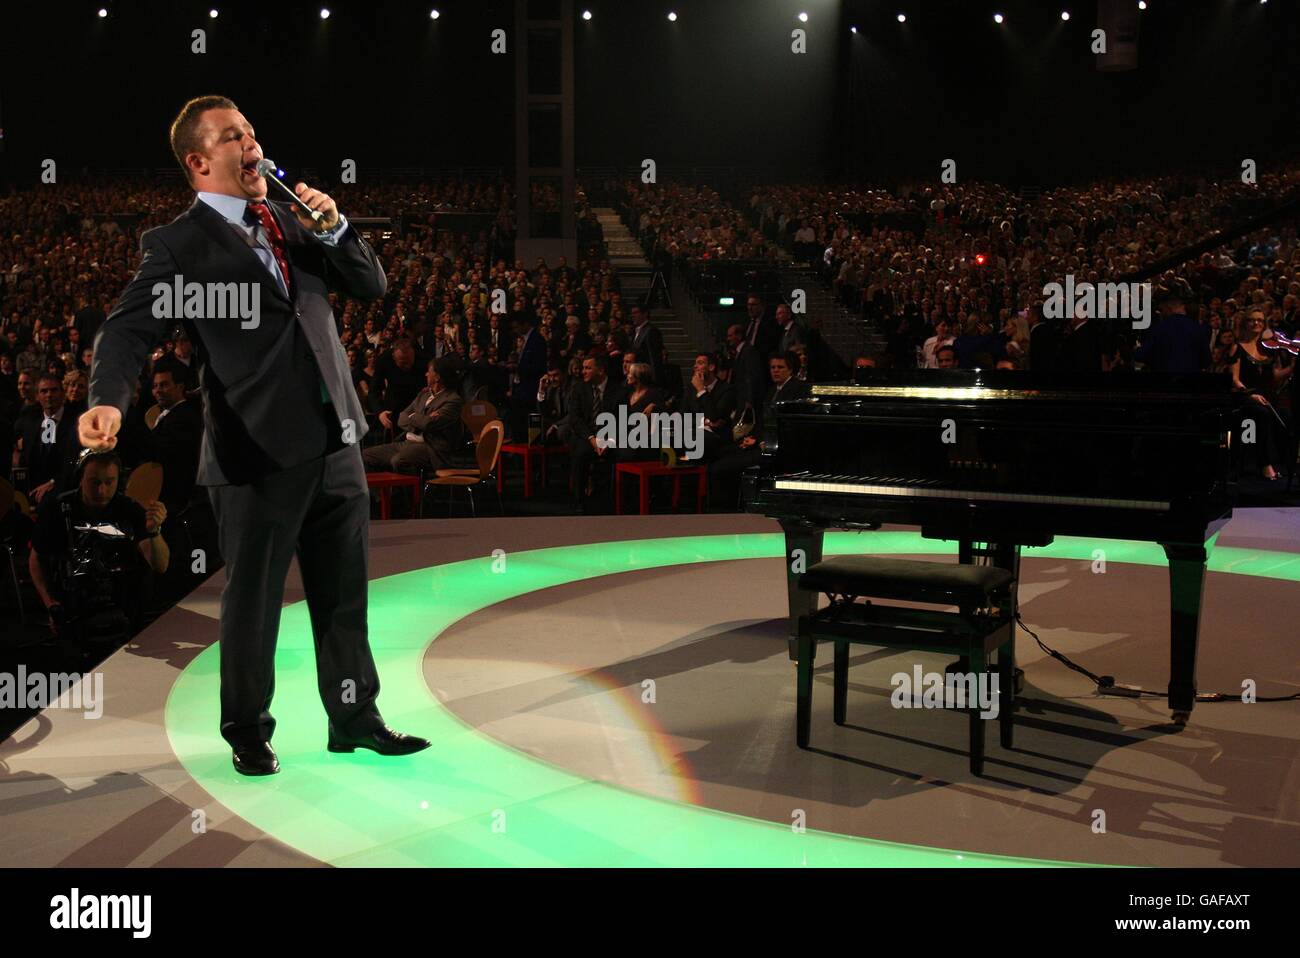 Matt Stevens performs during the BBC Sports Personality of the Year 2007 awards, at the NEC in Birmingham. Stock Photo